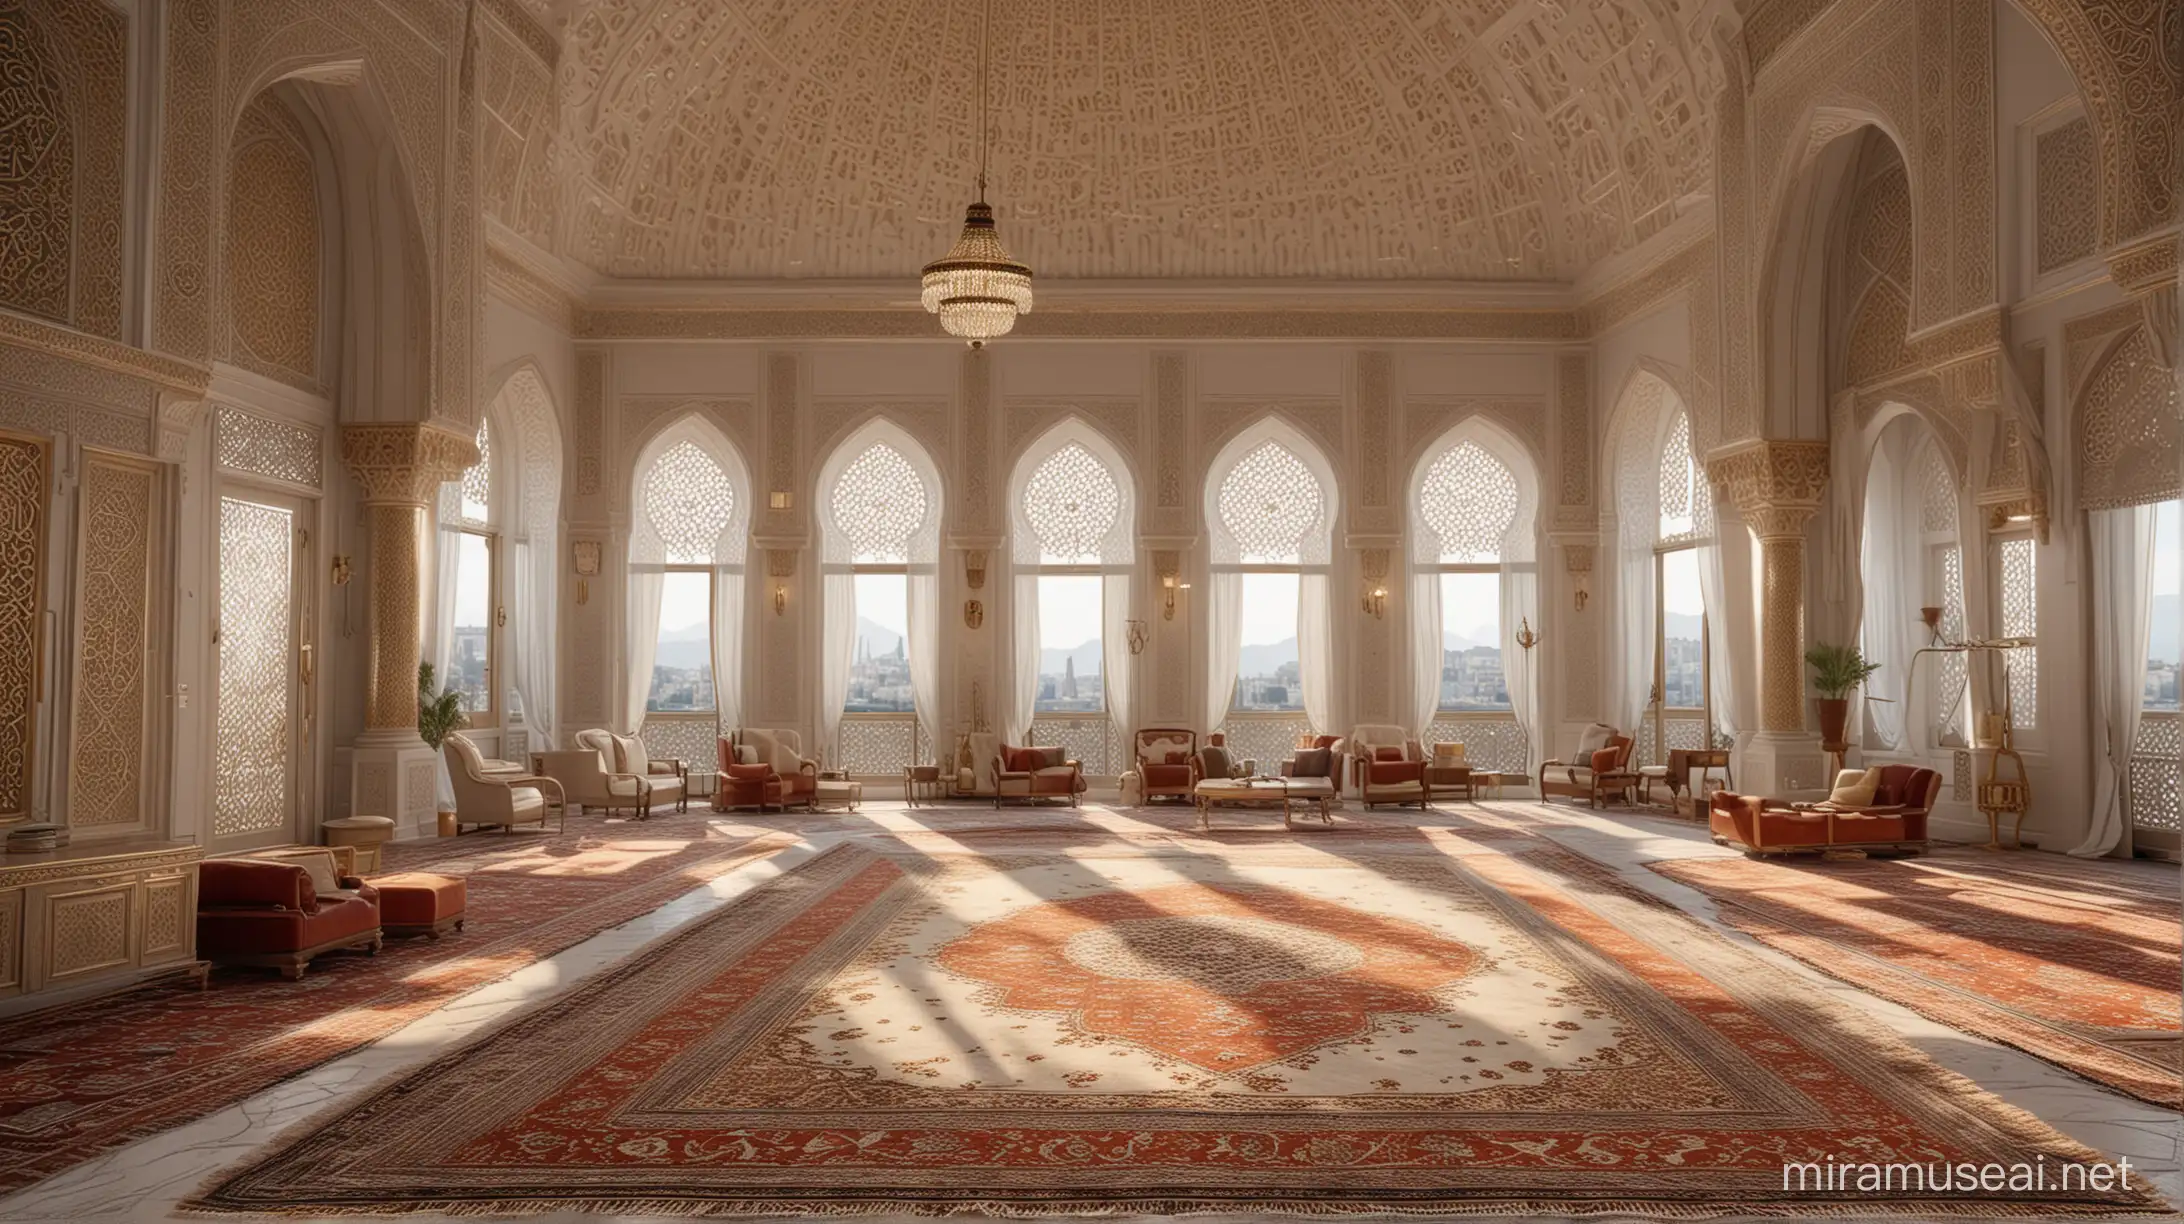 Elegant appearance of a large mosque thanks to its large floor-to-ceiling windows, simple white furniture with gold embroidery decorated with high-end traditional Turkish motifs, a modern room that contributes to the atmosphere of sophistication and elegance, and inside, a genuine Muslim, a few cheerful cute men with beards and robes in turbans with Turkish motifs. They are sitting on the carpets and reading the Quran. CanonEOS 5D Mark IV DSLR, 85 mm lens, sharp focus, intricate details, long exposure, f/2, ISO 100, shutter speed 1/125, diffused backlight, award-winning photography, monovision, excellent contrast, high sharpness, facial symmetry, depth of field, ultra detailed photography, ray tracing, global illumination, smooth, ultra high resolution, 8k, unreal engine 5, ultra sharp focus, award photography.